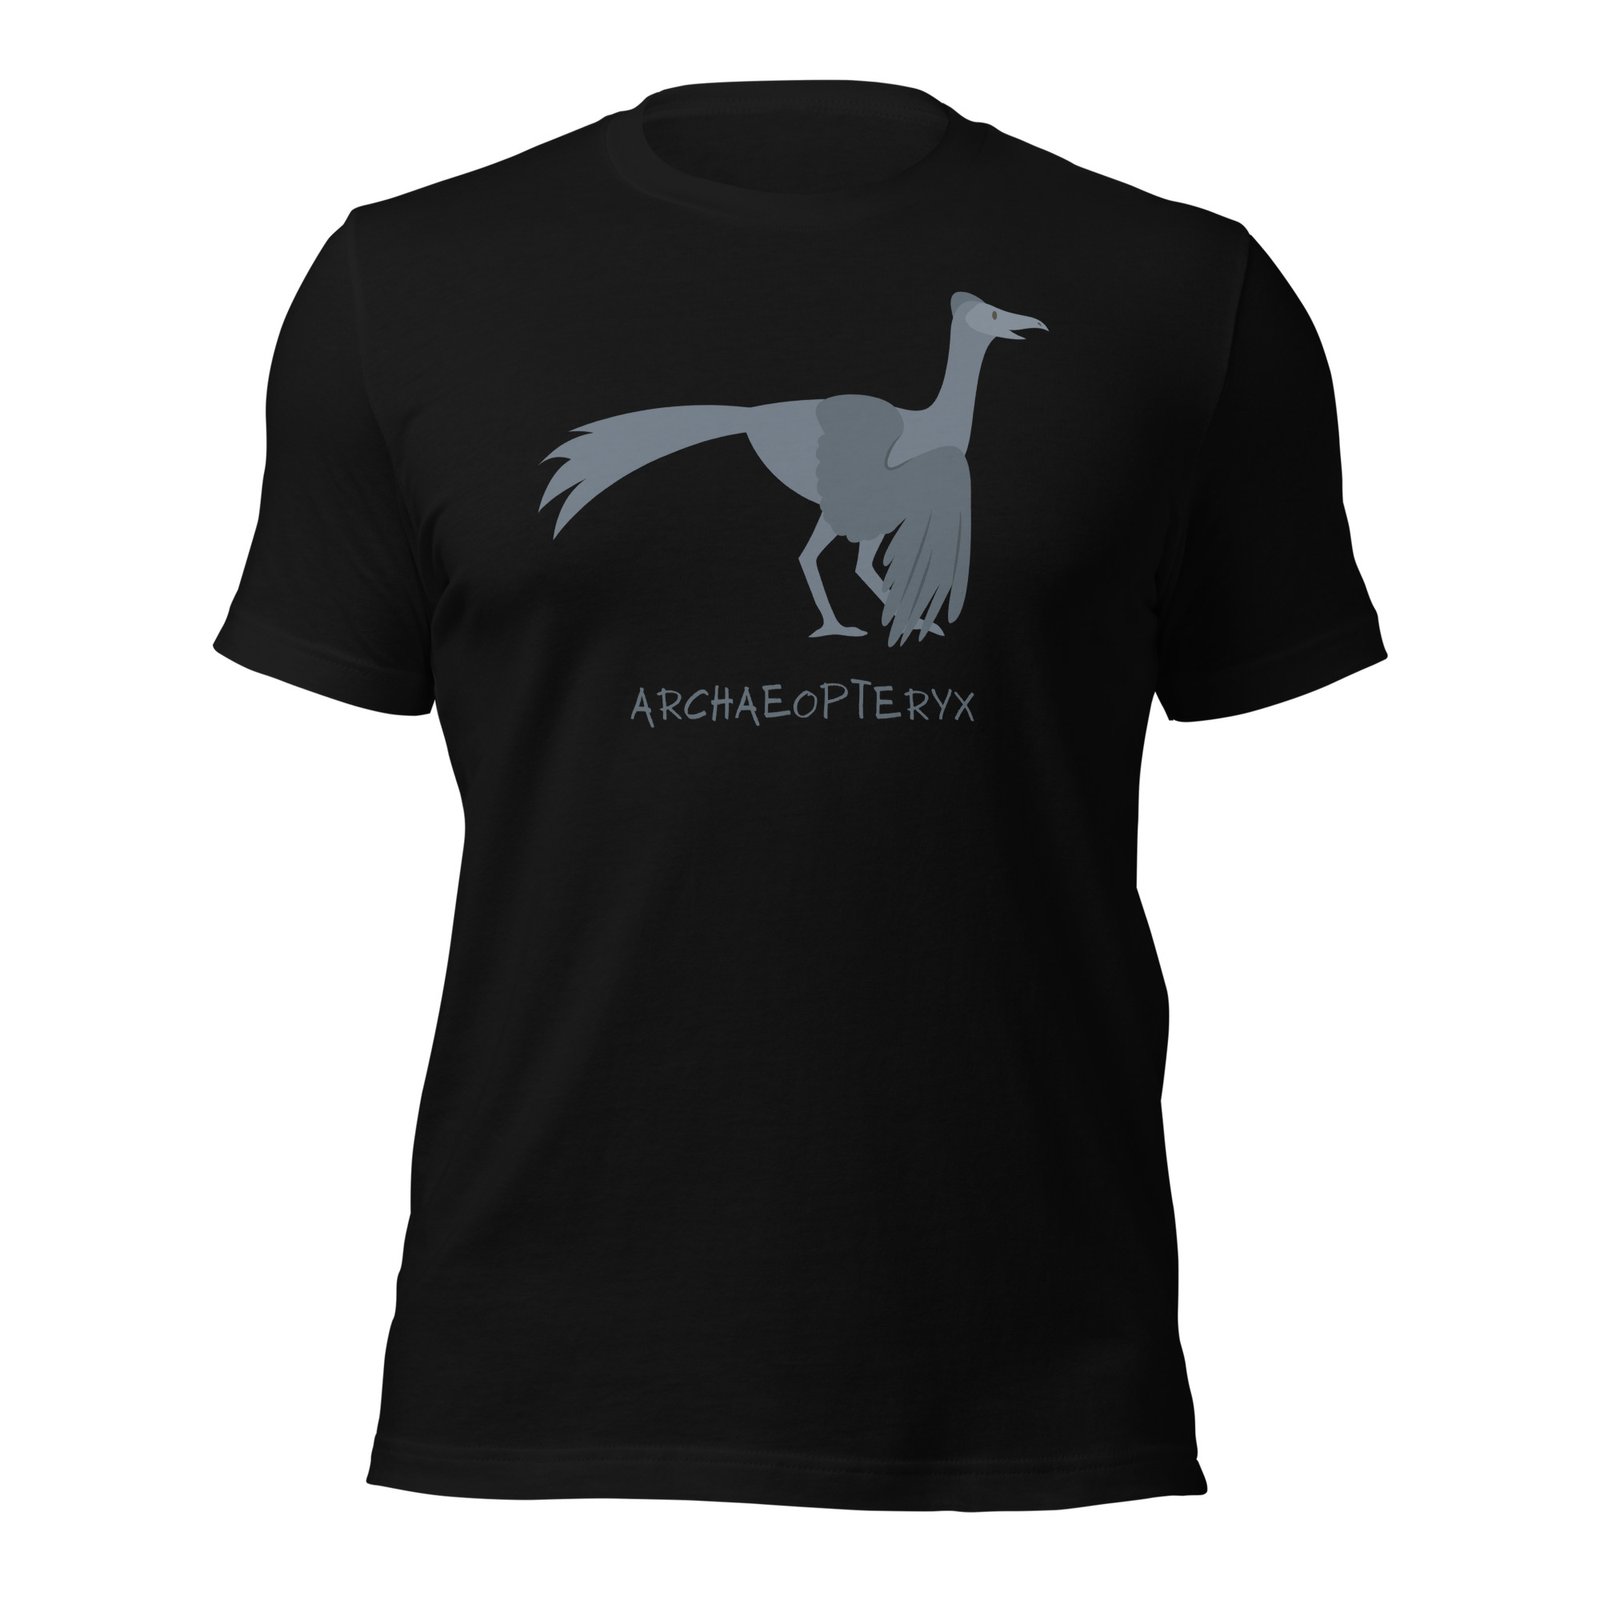 Fly Back in Time with the Archaeopteryx T-Shirt